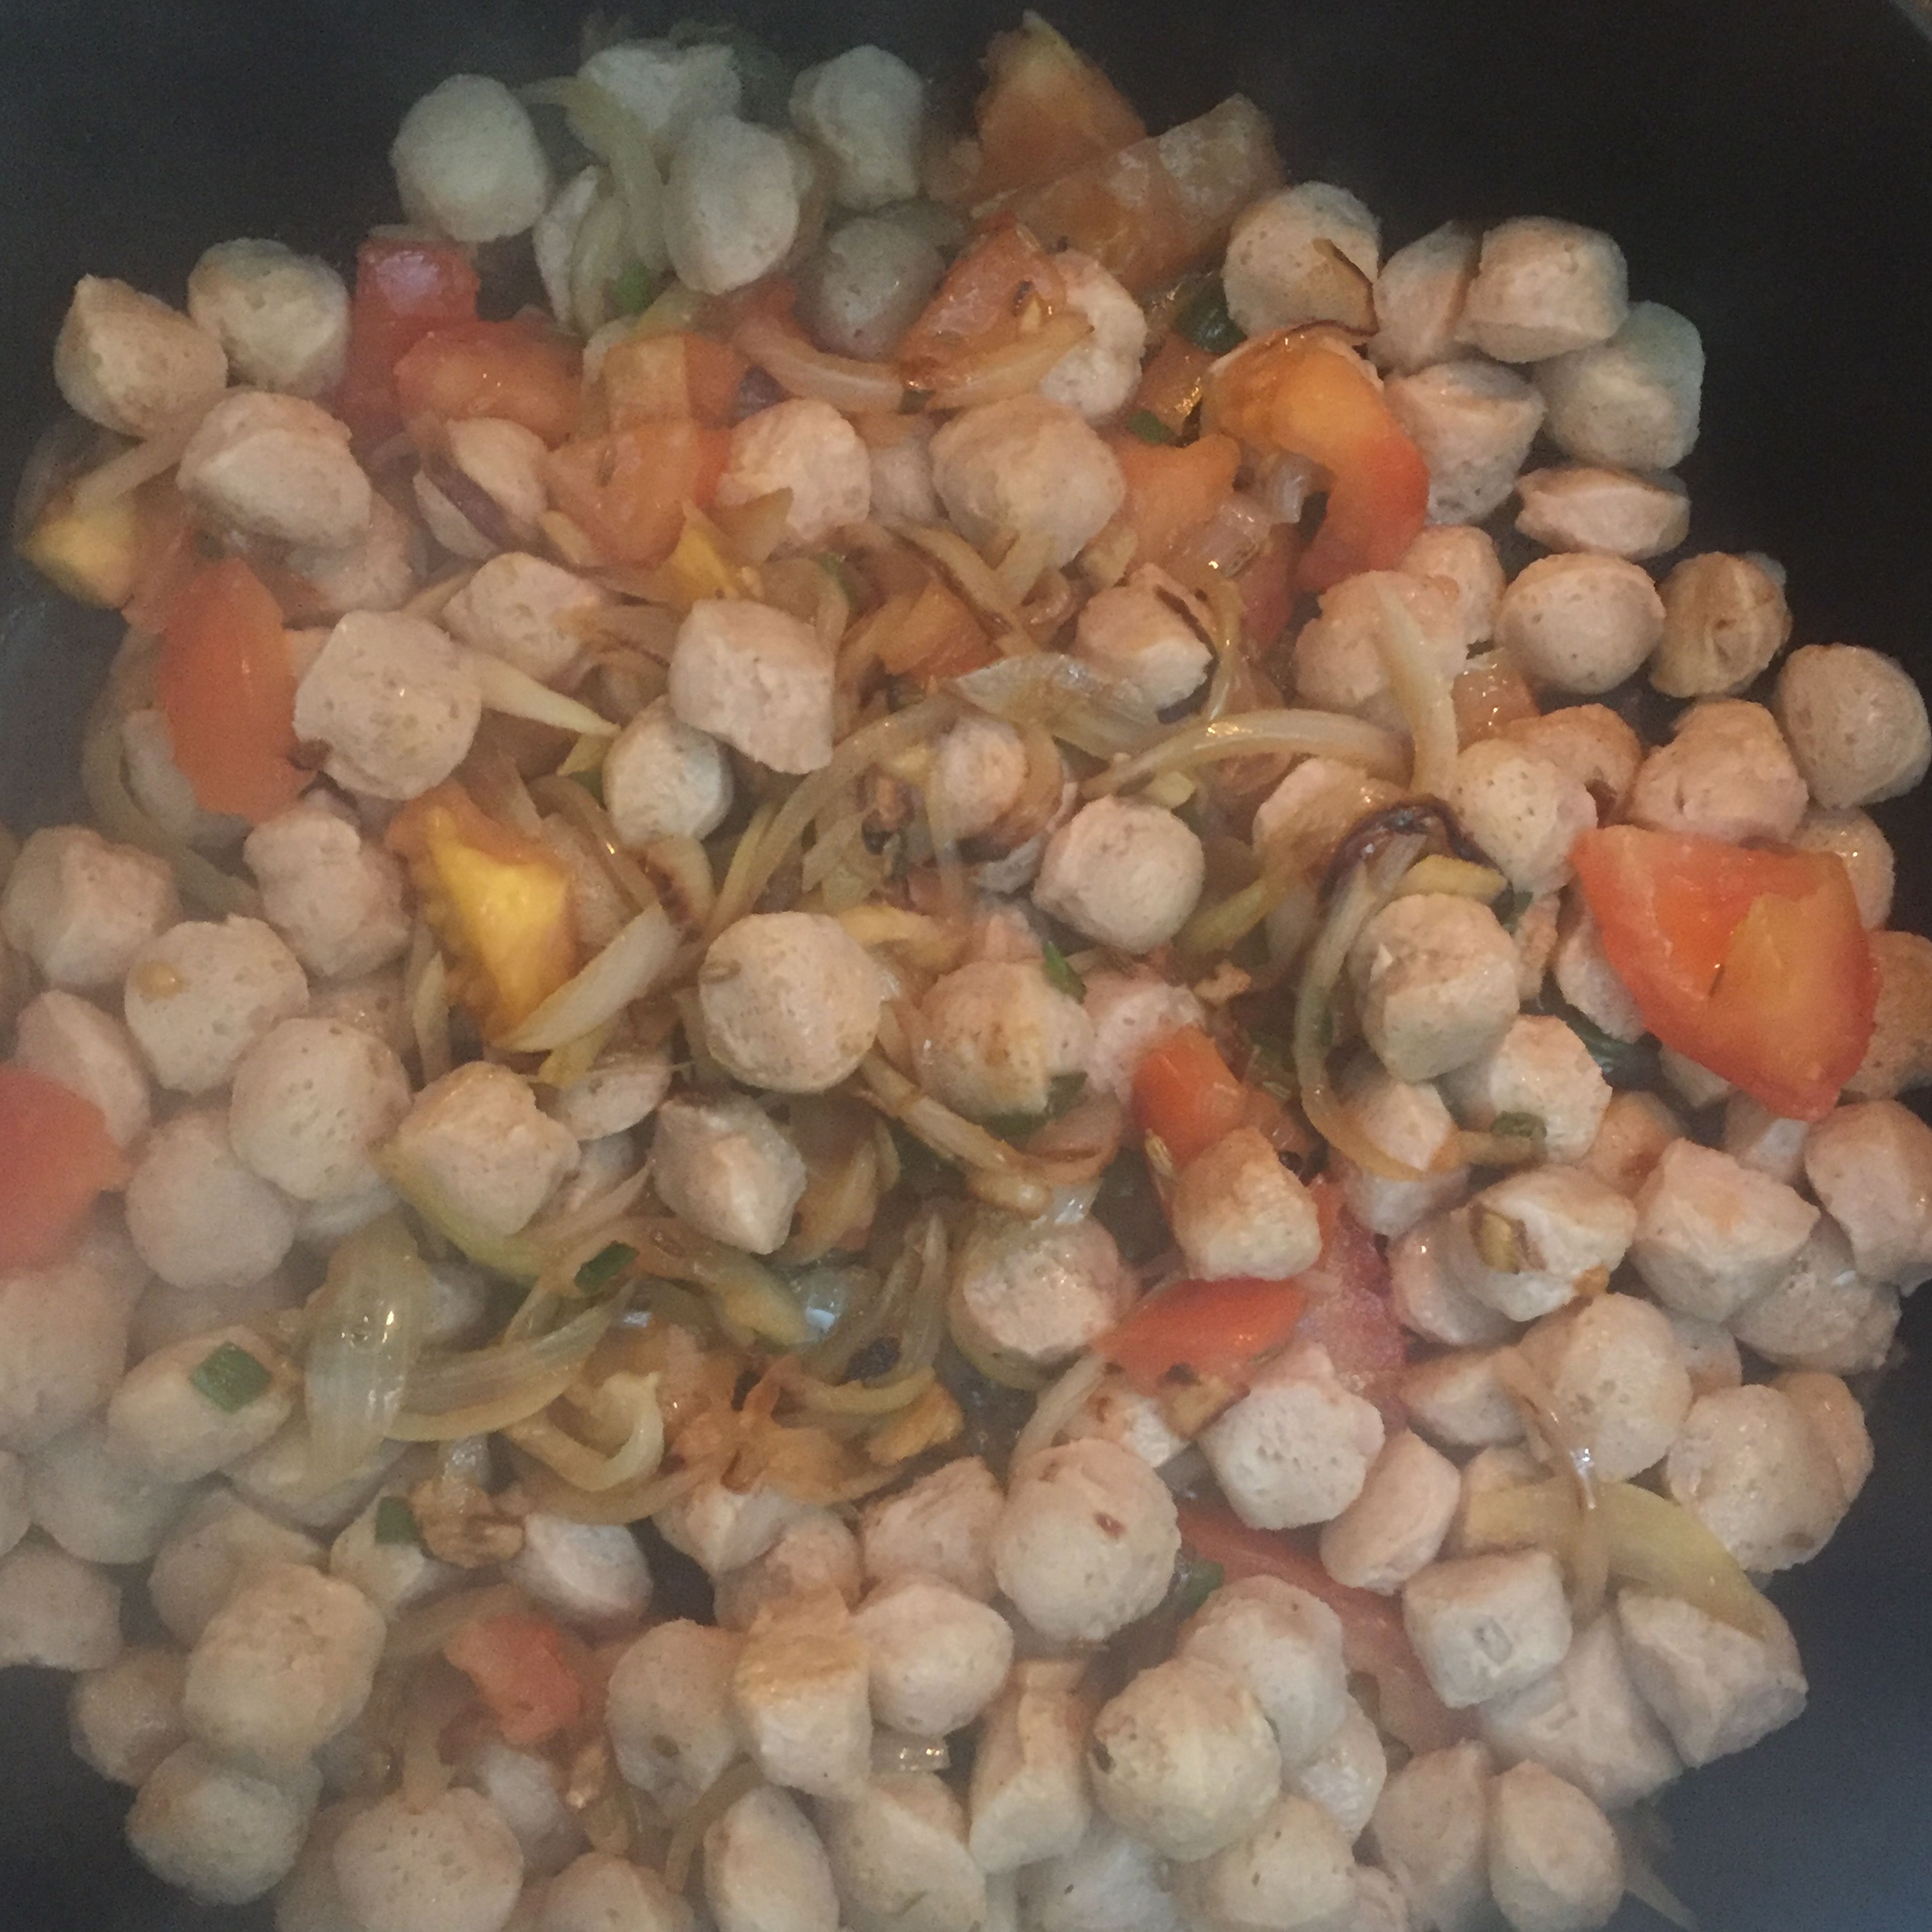 Next add the Tomate and the soya bean and close the lid until soya bean gets cooked well.